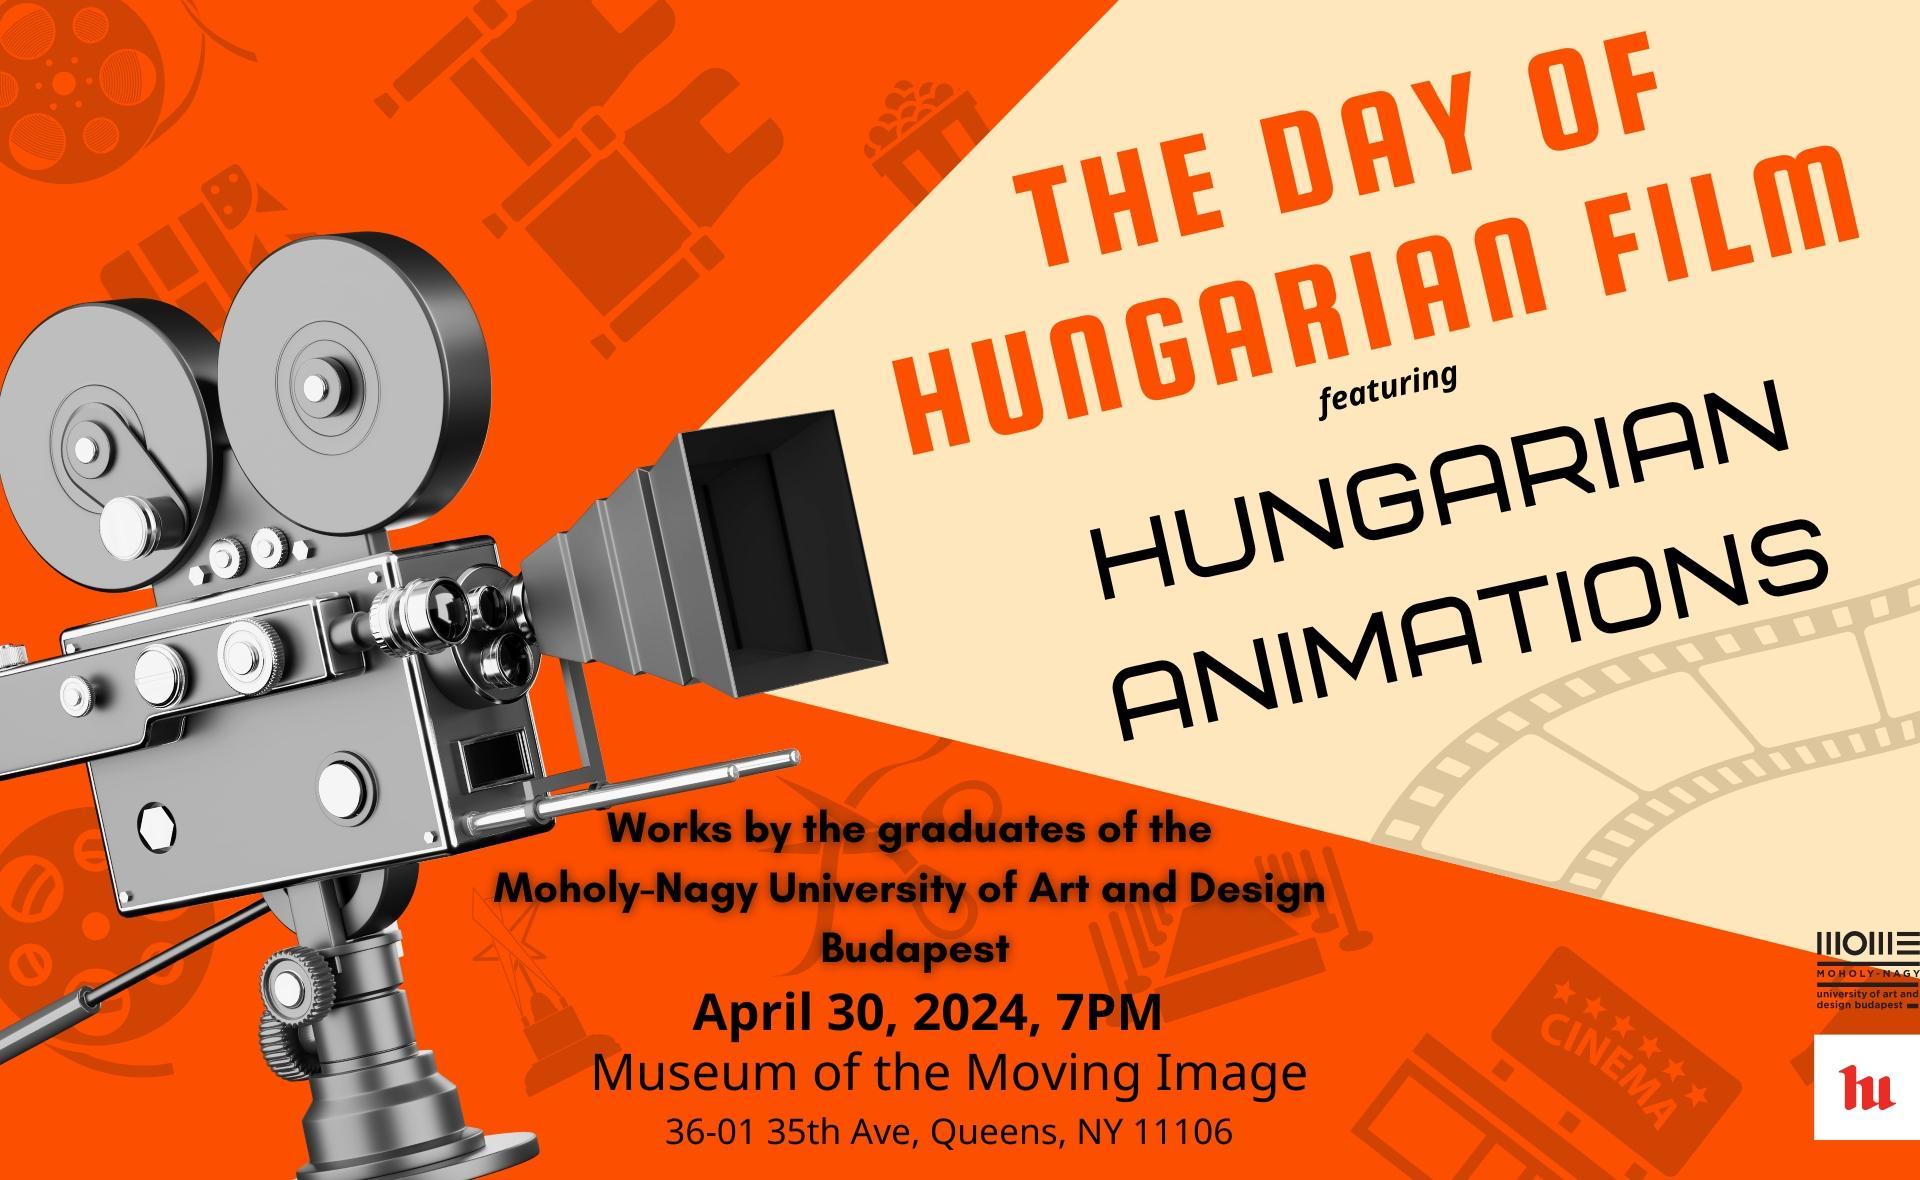 The Day of Hungarian Film - Presenting Works by Hungarian Animators